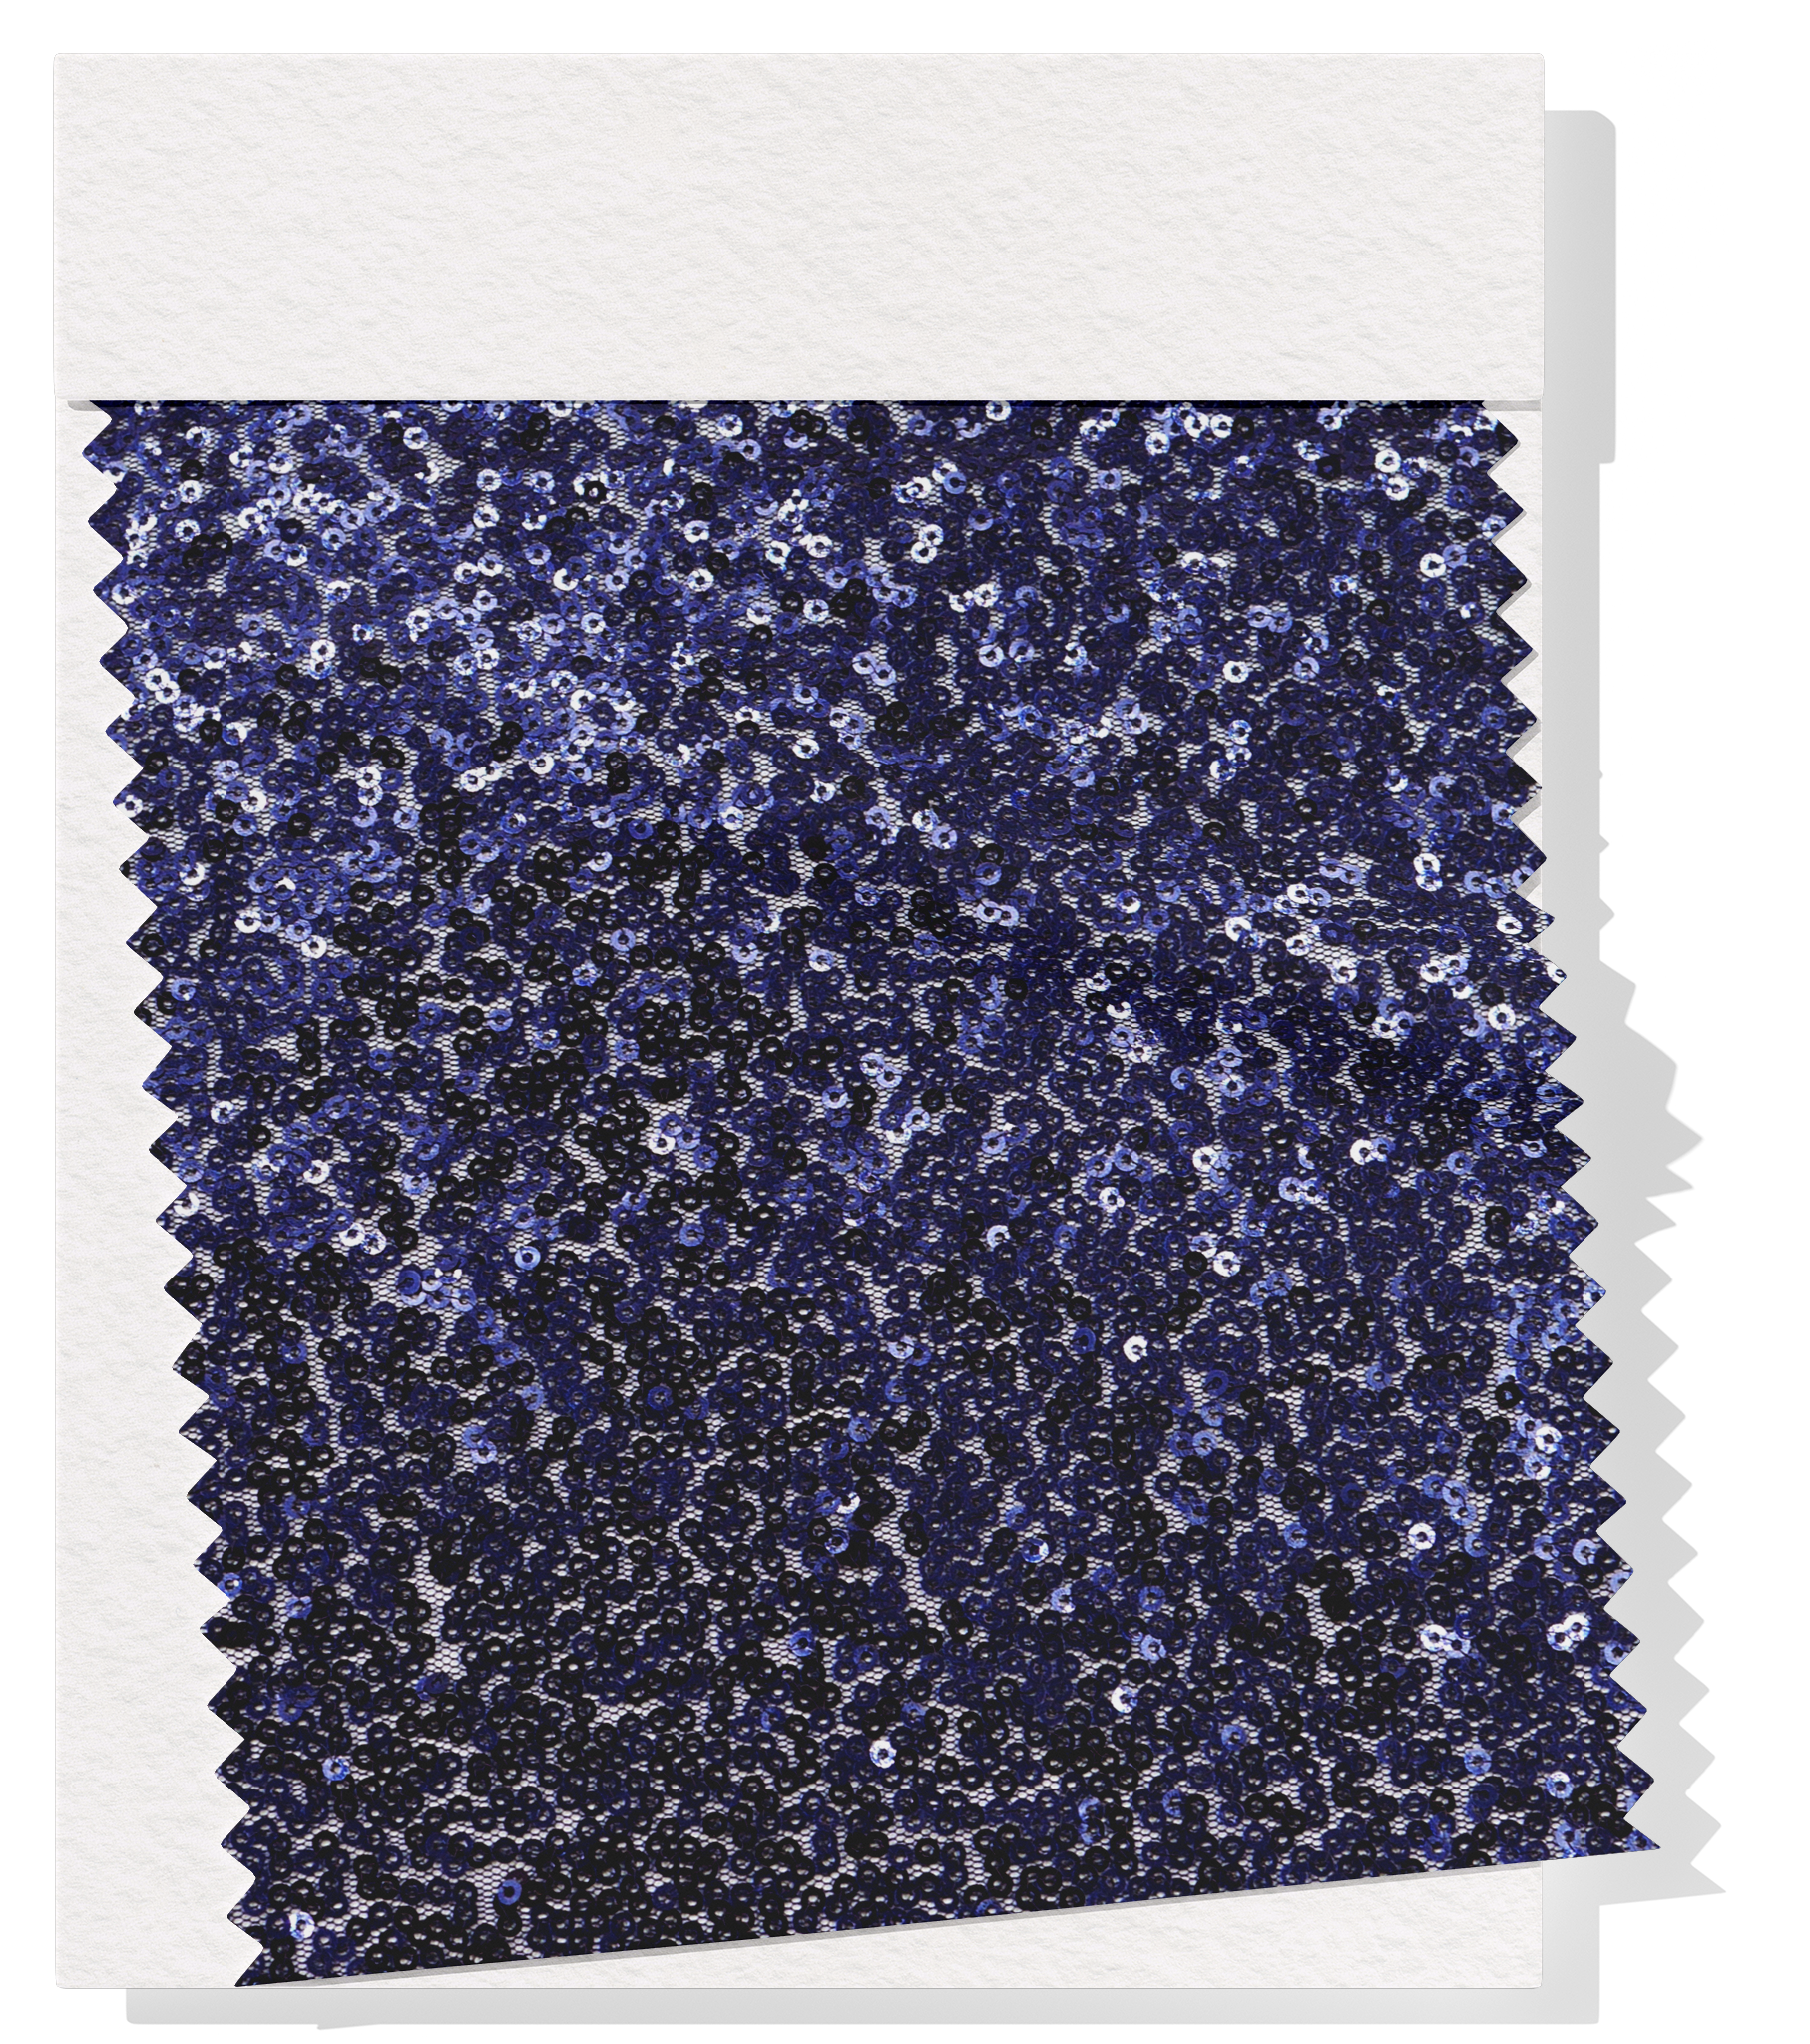 Polyester Mesh Sequins $25.00p/m - Navy